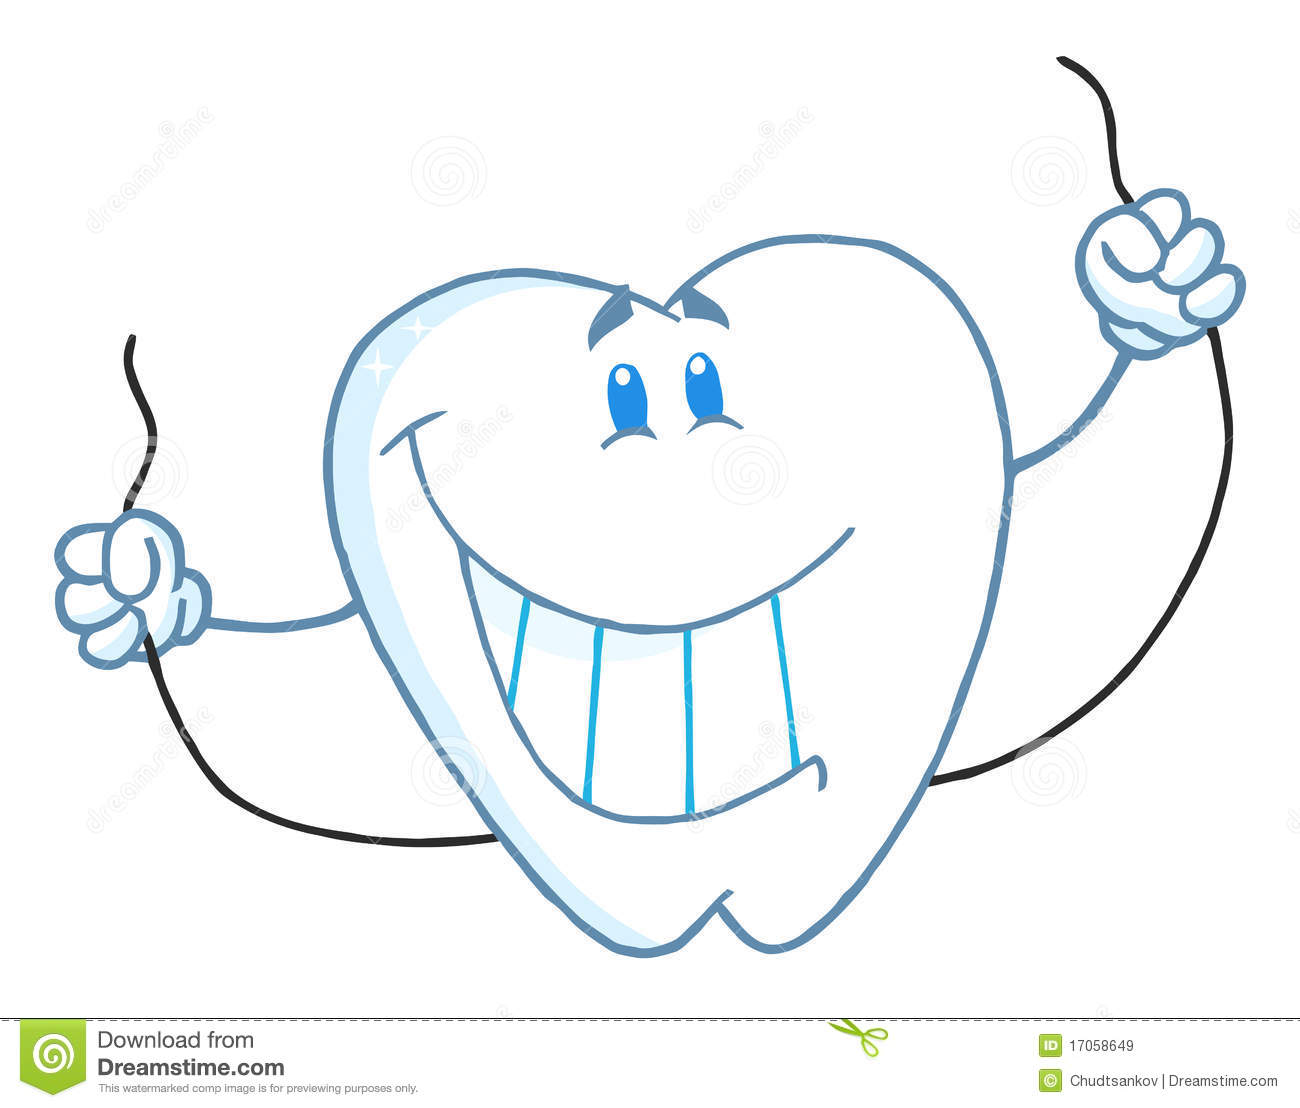 Dental Tooth Character Holding Floss Royalty Free Stock Images   Image